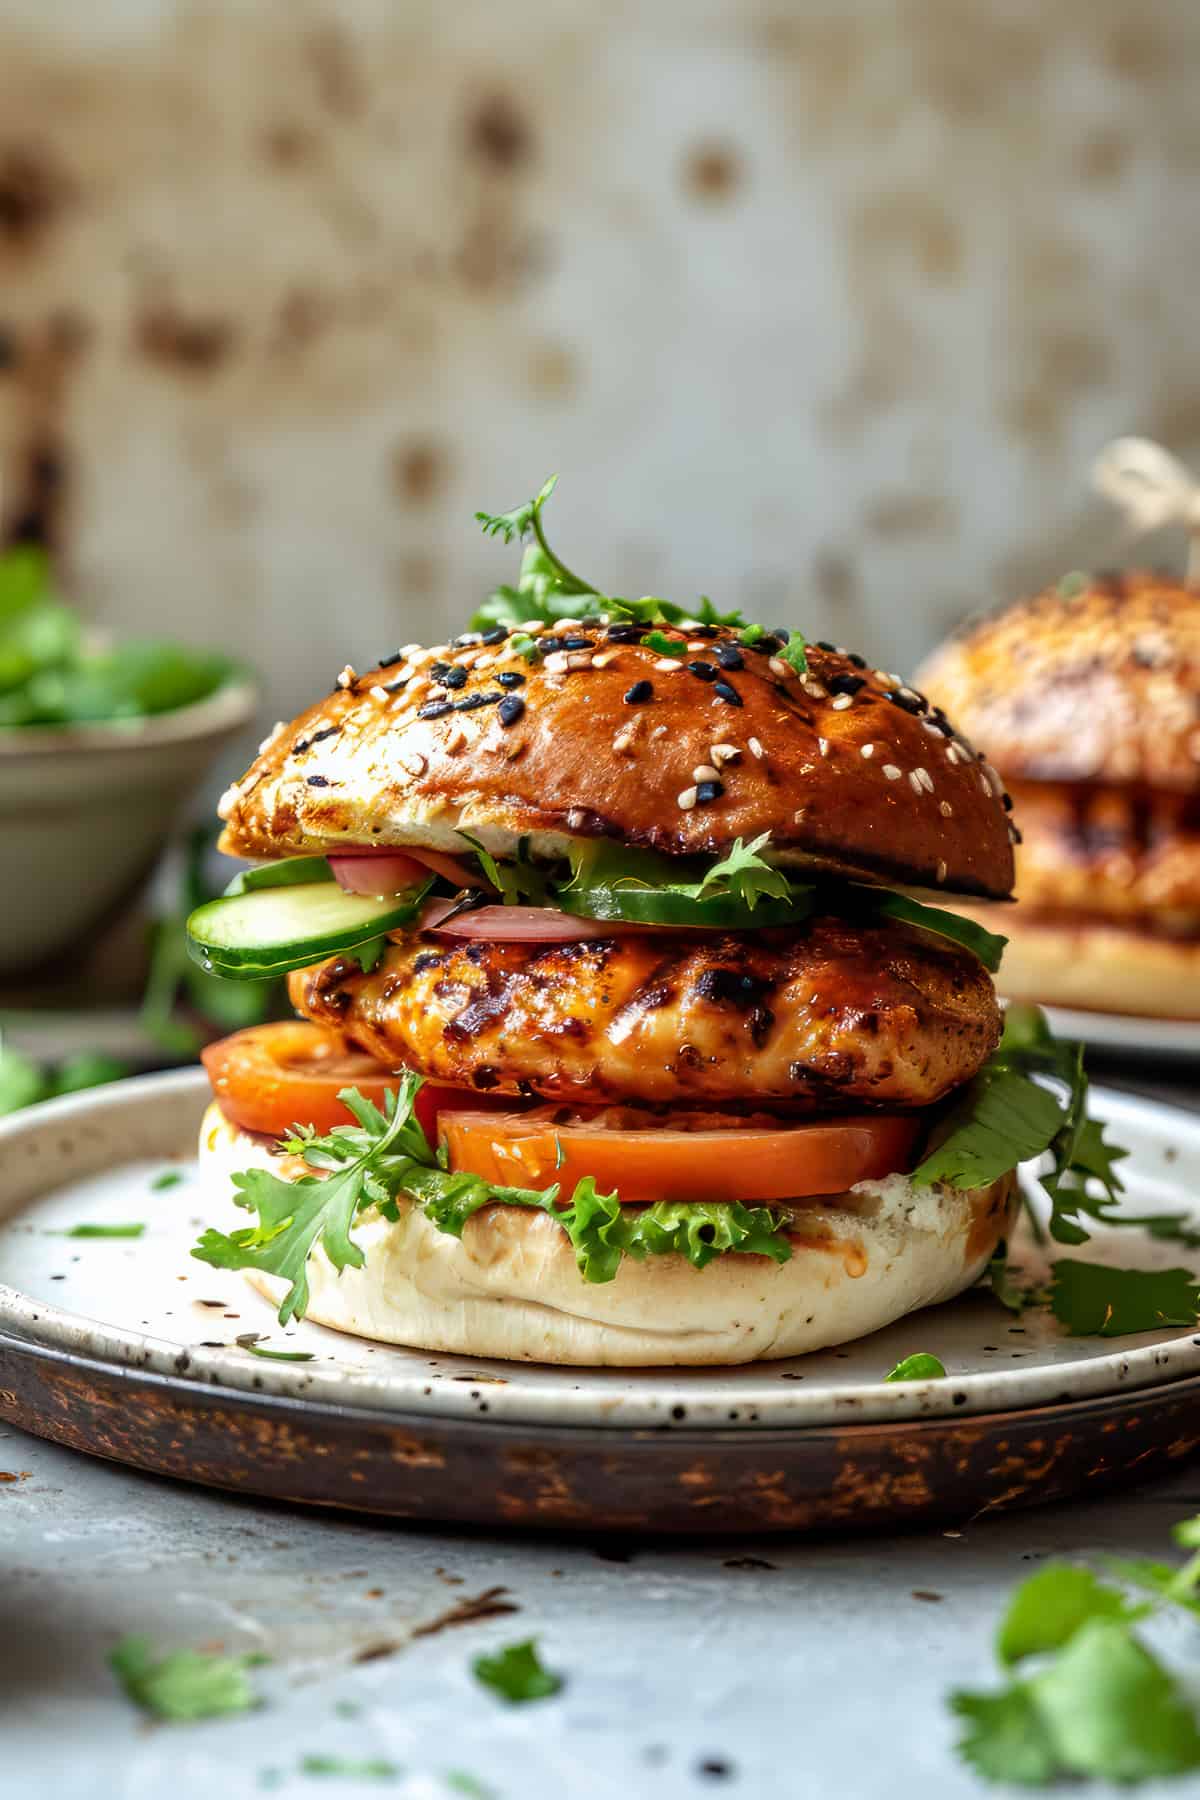 Grilled chicken burger with korean spices and sauce.